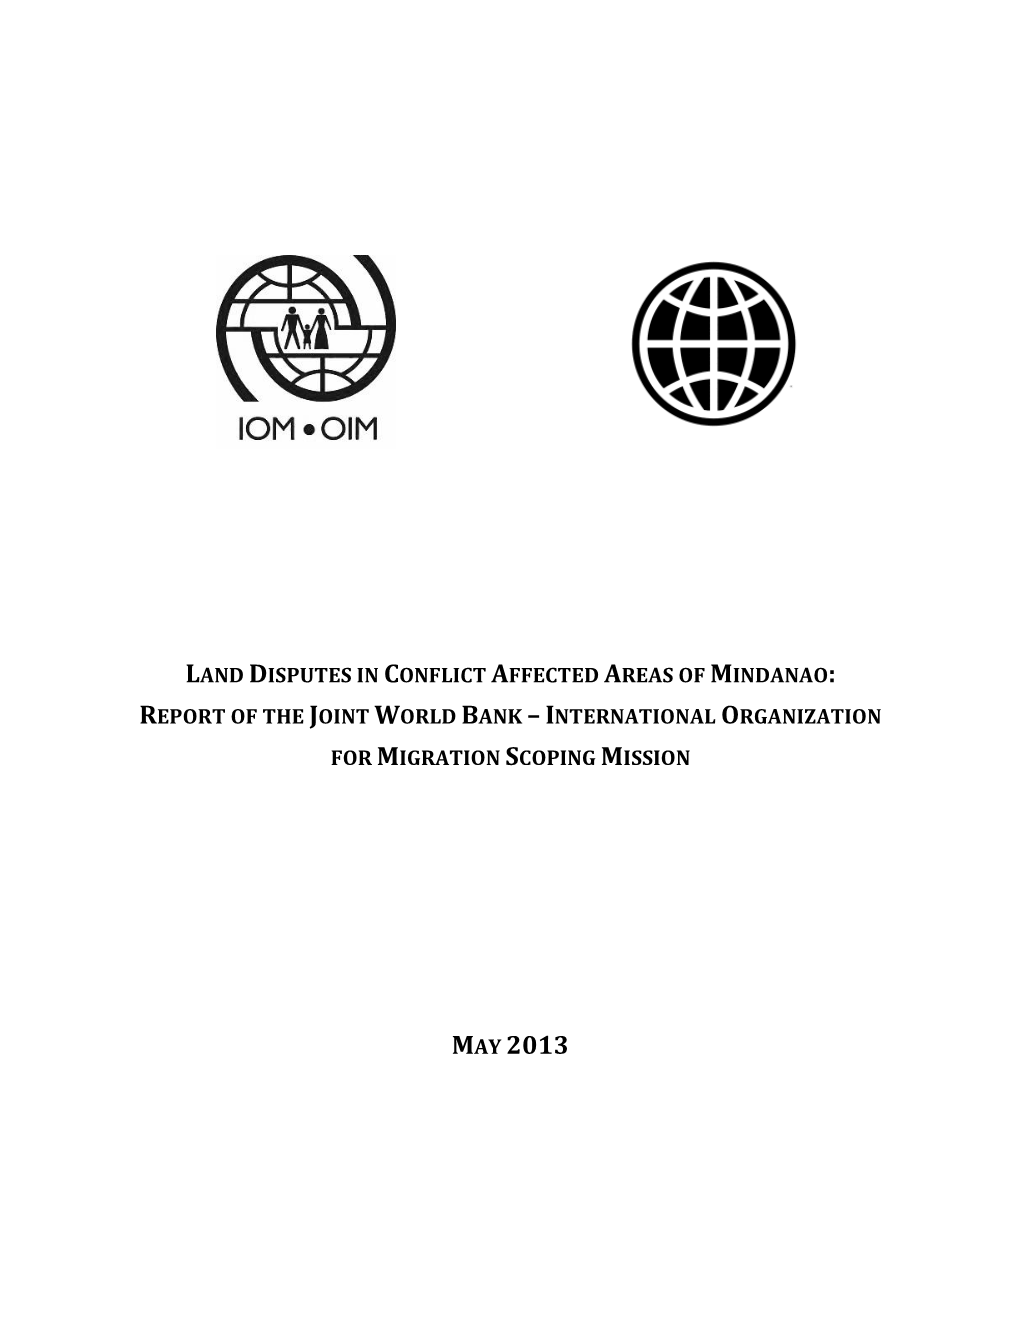 Land Disputes in Conflict Affected Areas of Mindanao: Report of the Joint World Bank – International Organization for Migration Scoping Mission